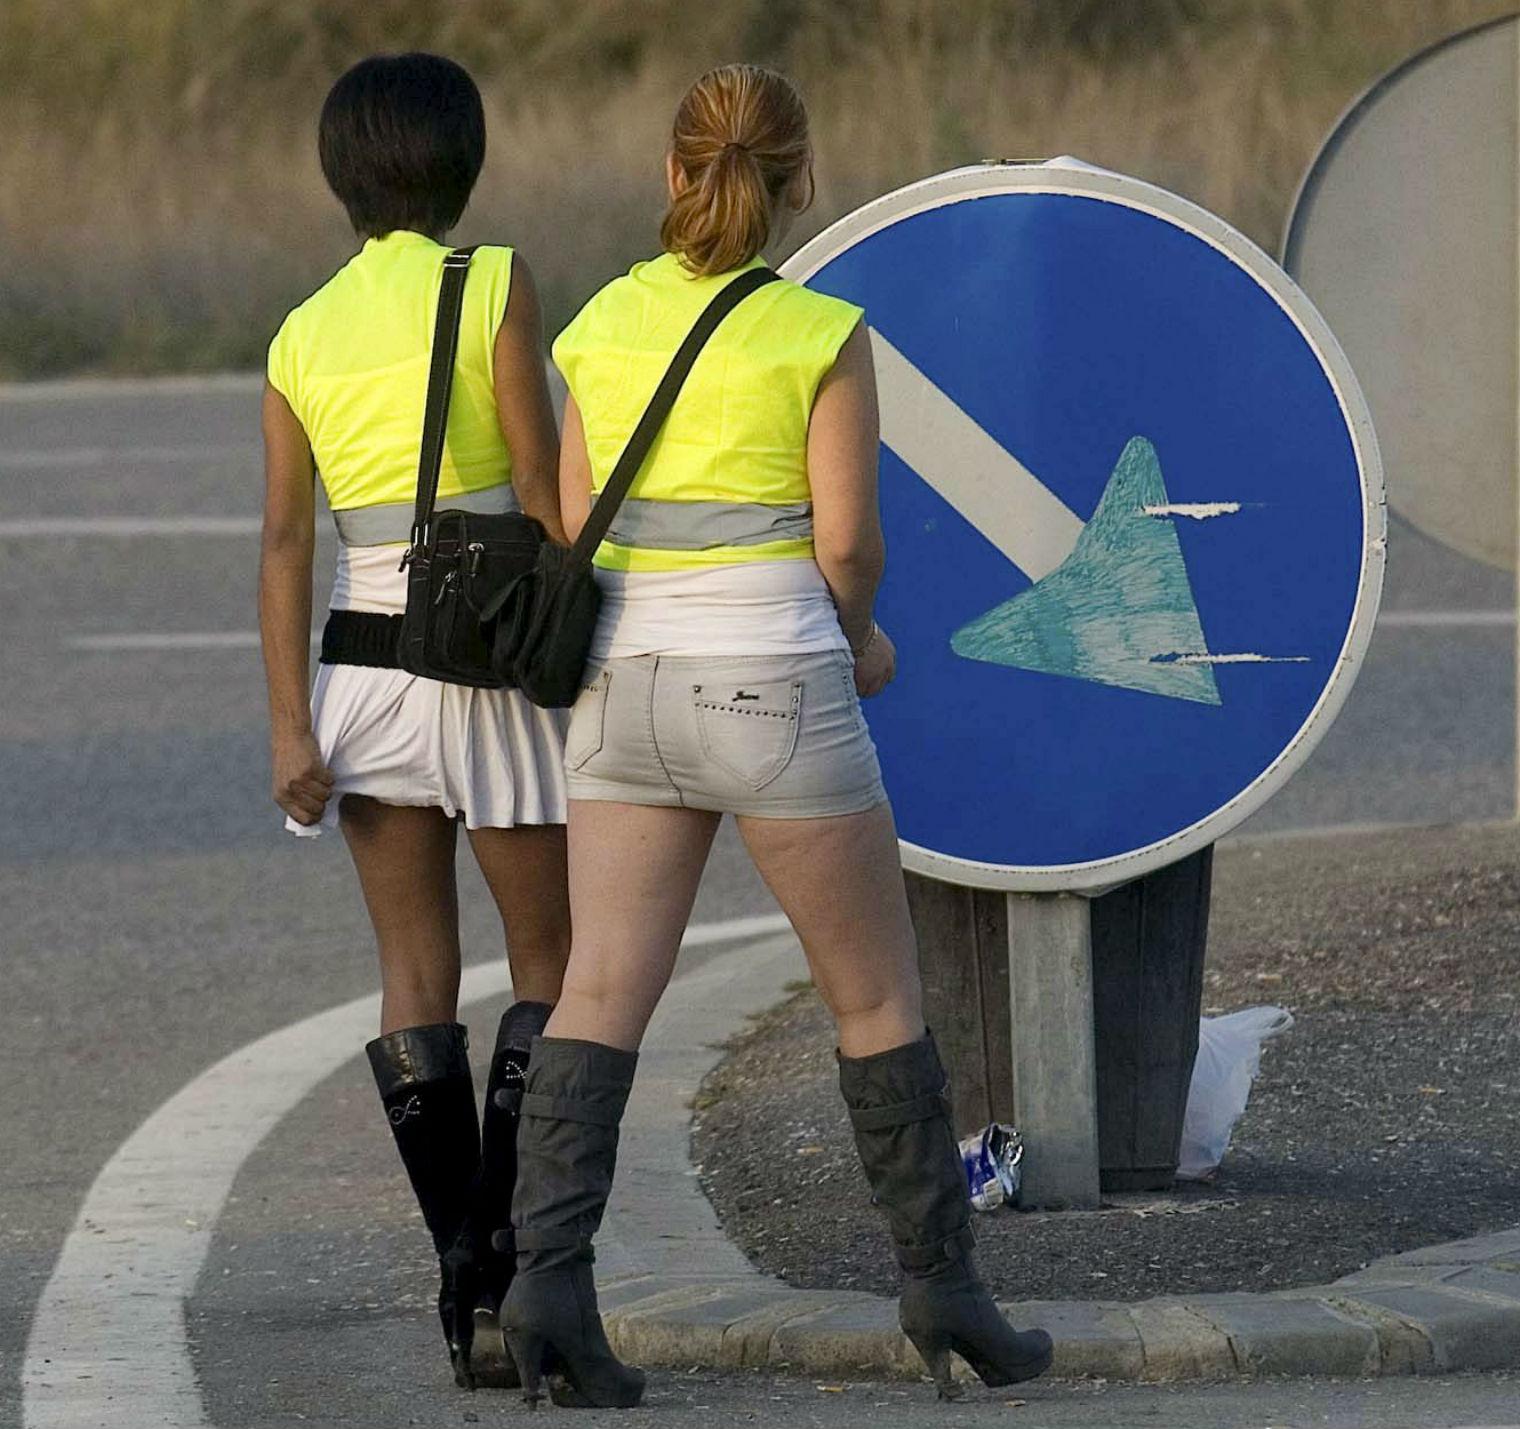 This Italian Council Actually Wants Local Prostitutes To Become More 